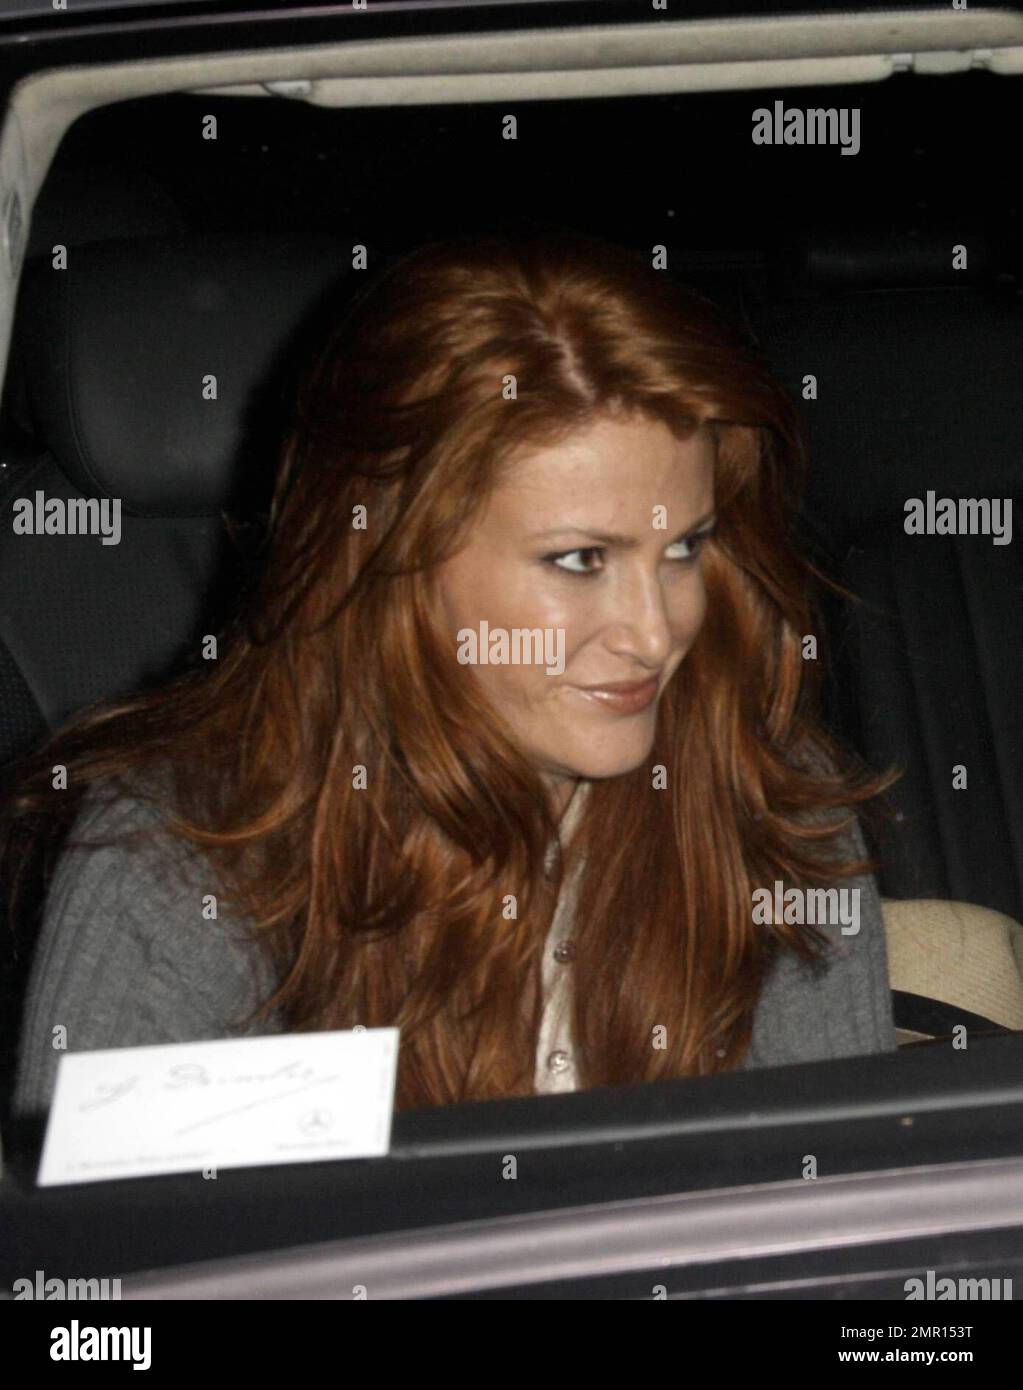 Exclusive!! It looks as if Angie Everhart and Joe Pesci are back together again as they leave the restaurant Ago. Everhart has reportedly accused ex-boyfriend, actor Chad Stansbury, of violently choking her during an incident in August. But, according to the reports, the LA County District Attorney rejected the case after it decided there wasn't enough evidence to prosecute. Angie told the cops that Stansbury choked her during a heated argument and fled the scene. He was then arrested and booked on suspicion of domestic violence. Los Angeles, CA. 10/2/08. Stock Photo